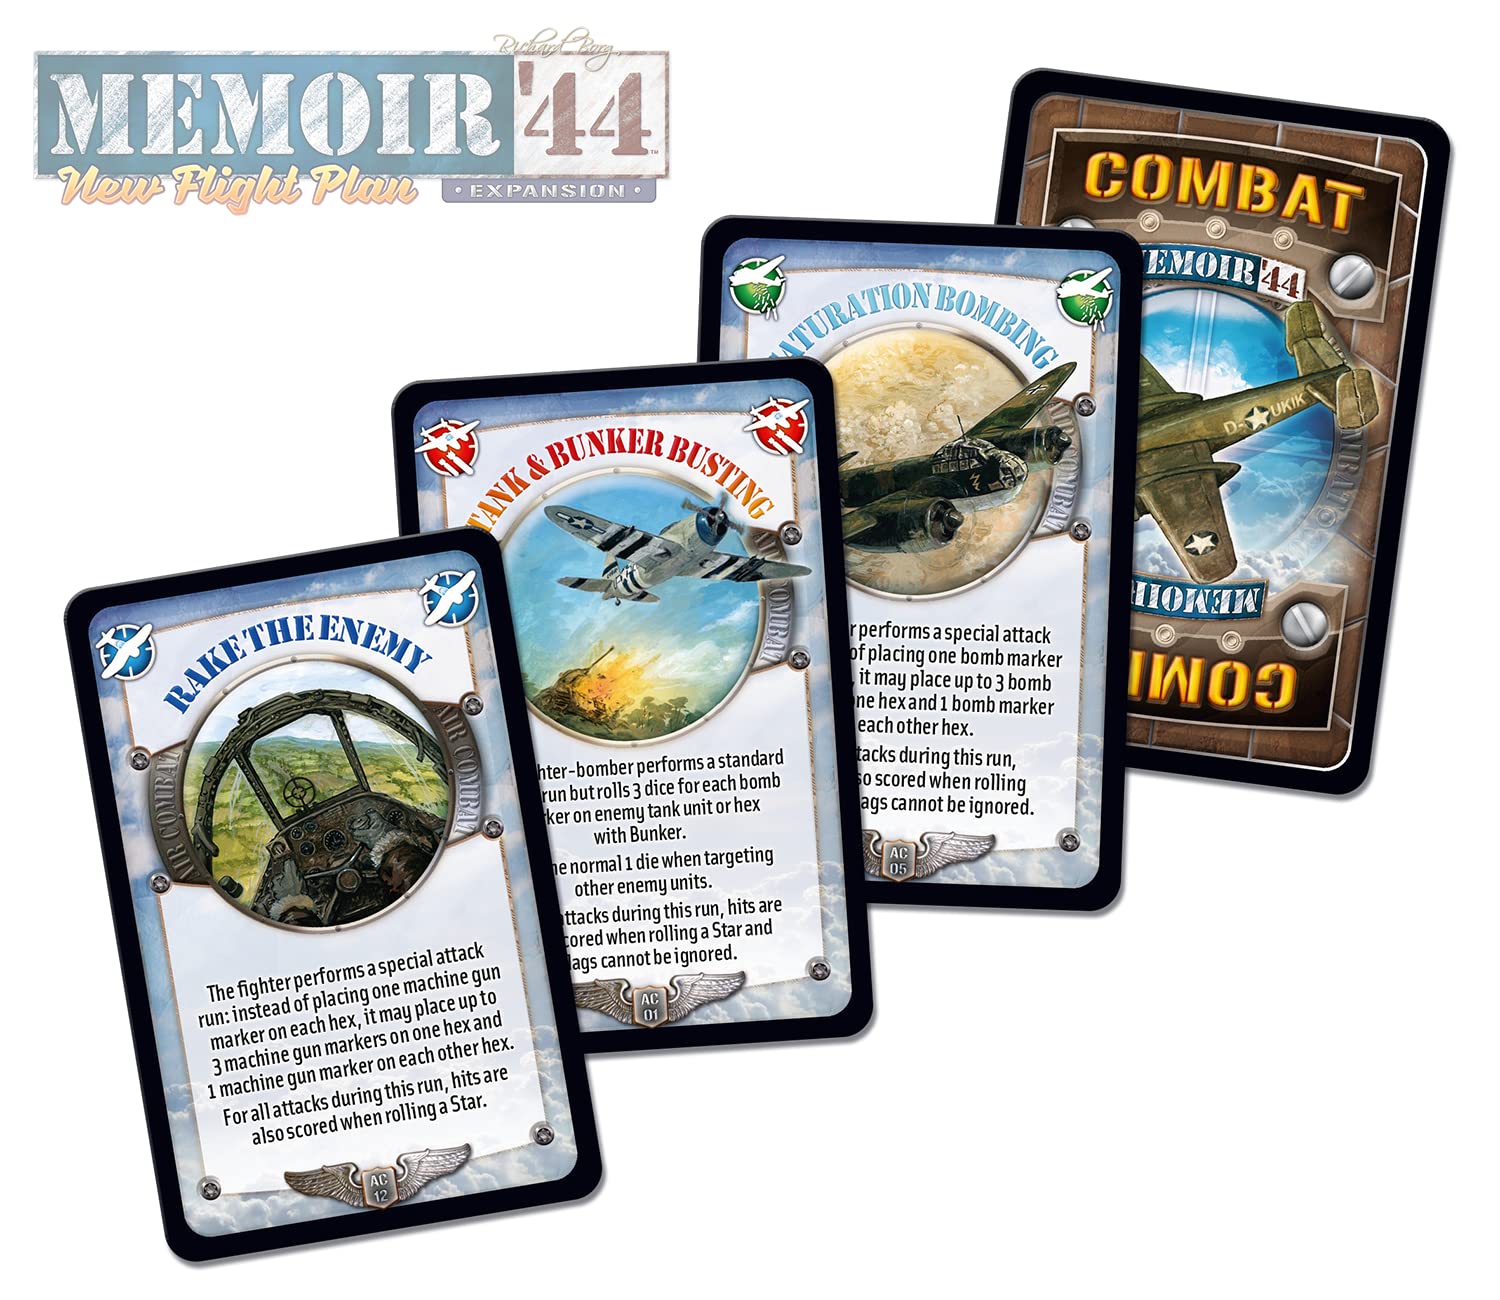 Memoir '44 New Flight Plan Board Game Expansion | Historical Miniatures Battle Game | Strategy Game for Adults & Kids | Ages 8+ | 2 Players | Avg. Playtime 30-60 Mins | Made by Days of Wonder